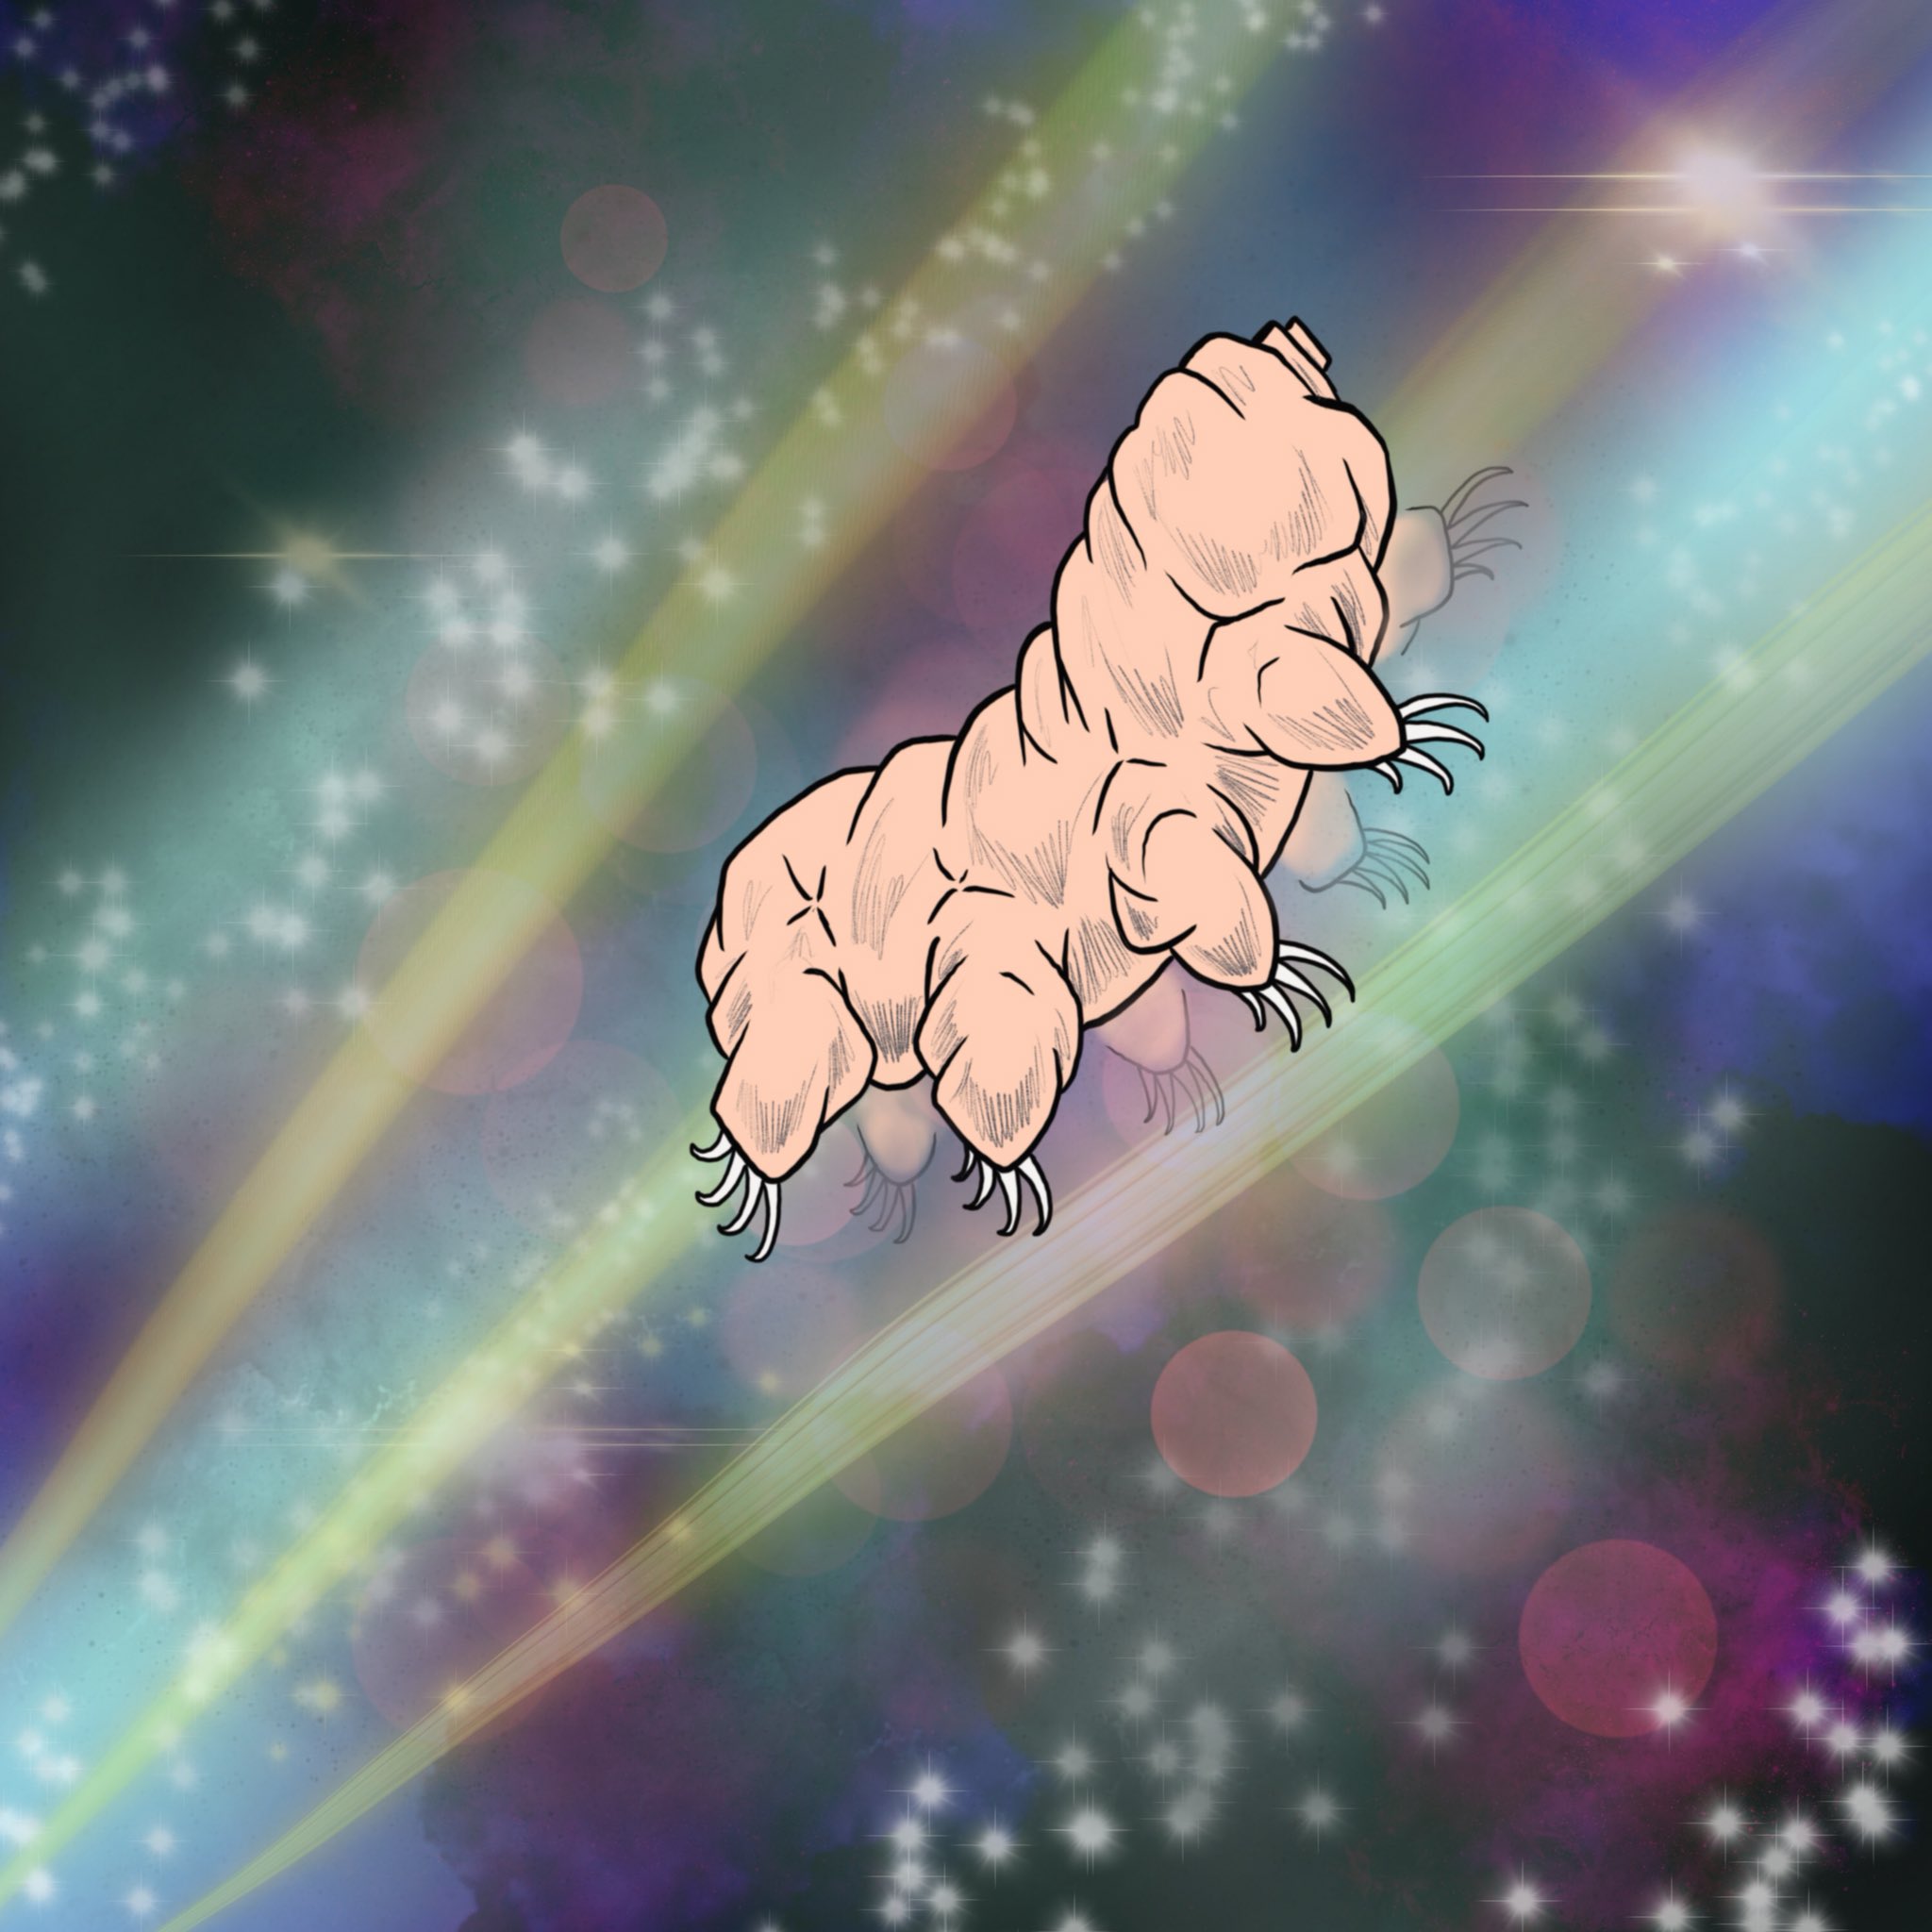 Art of Tardigrade floating in an ethereal background